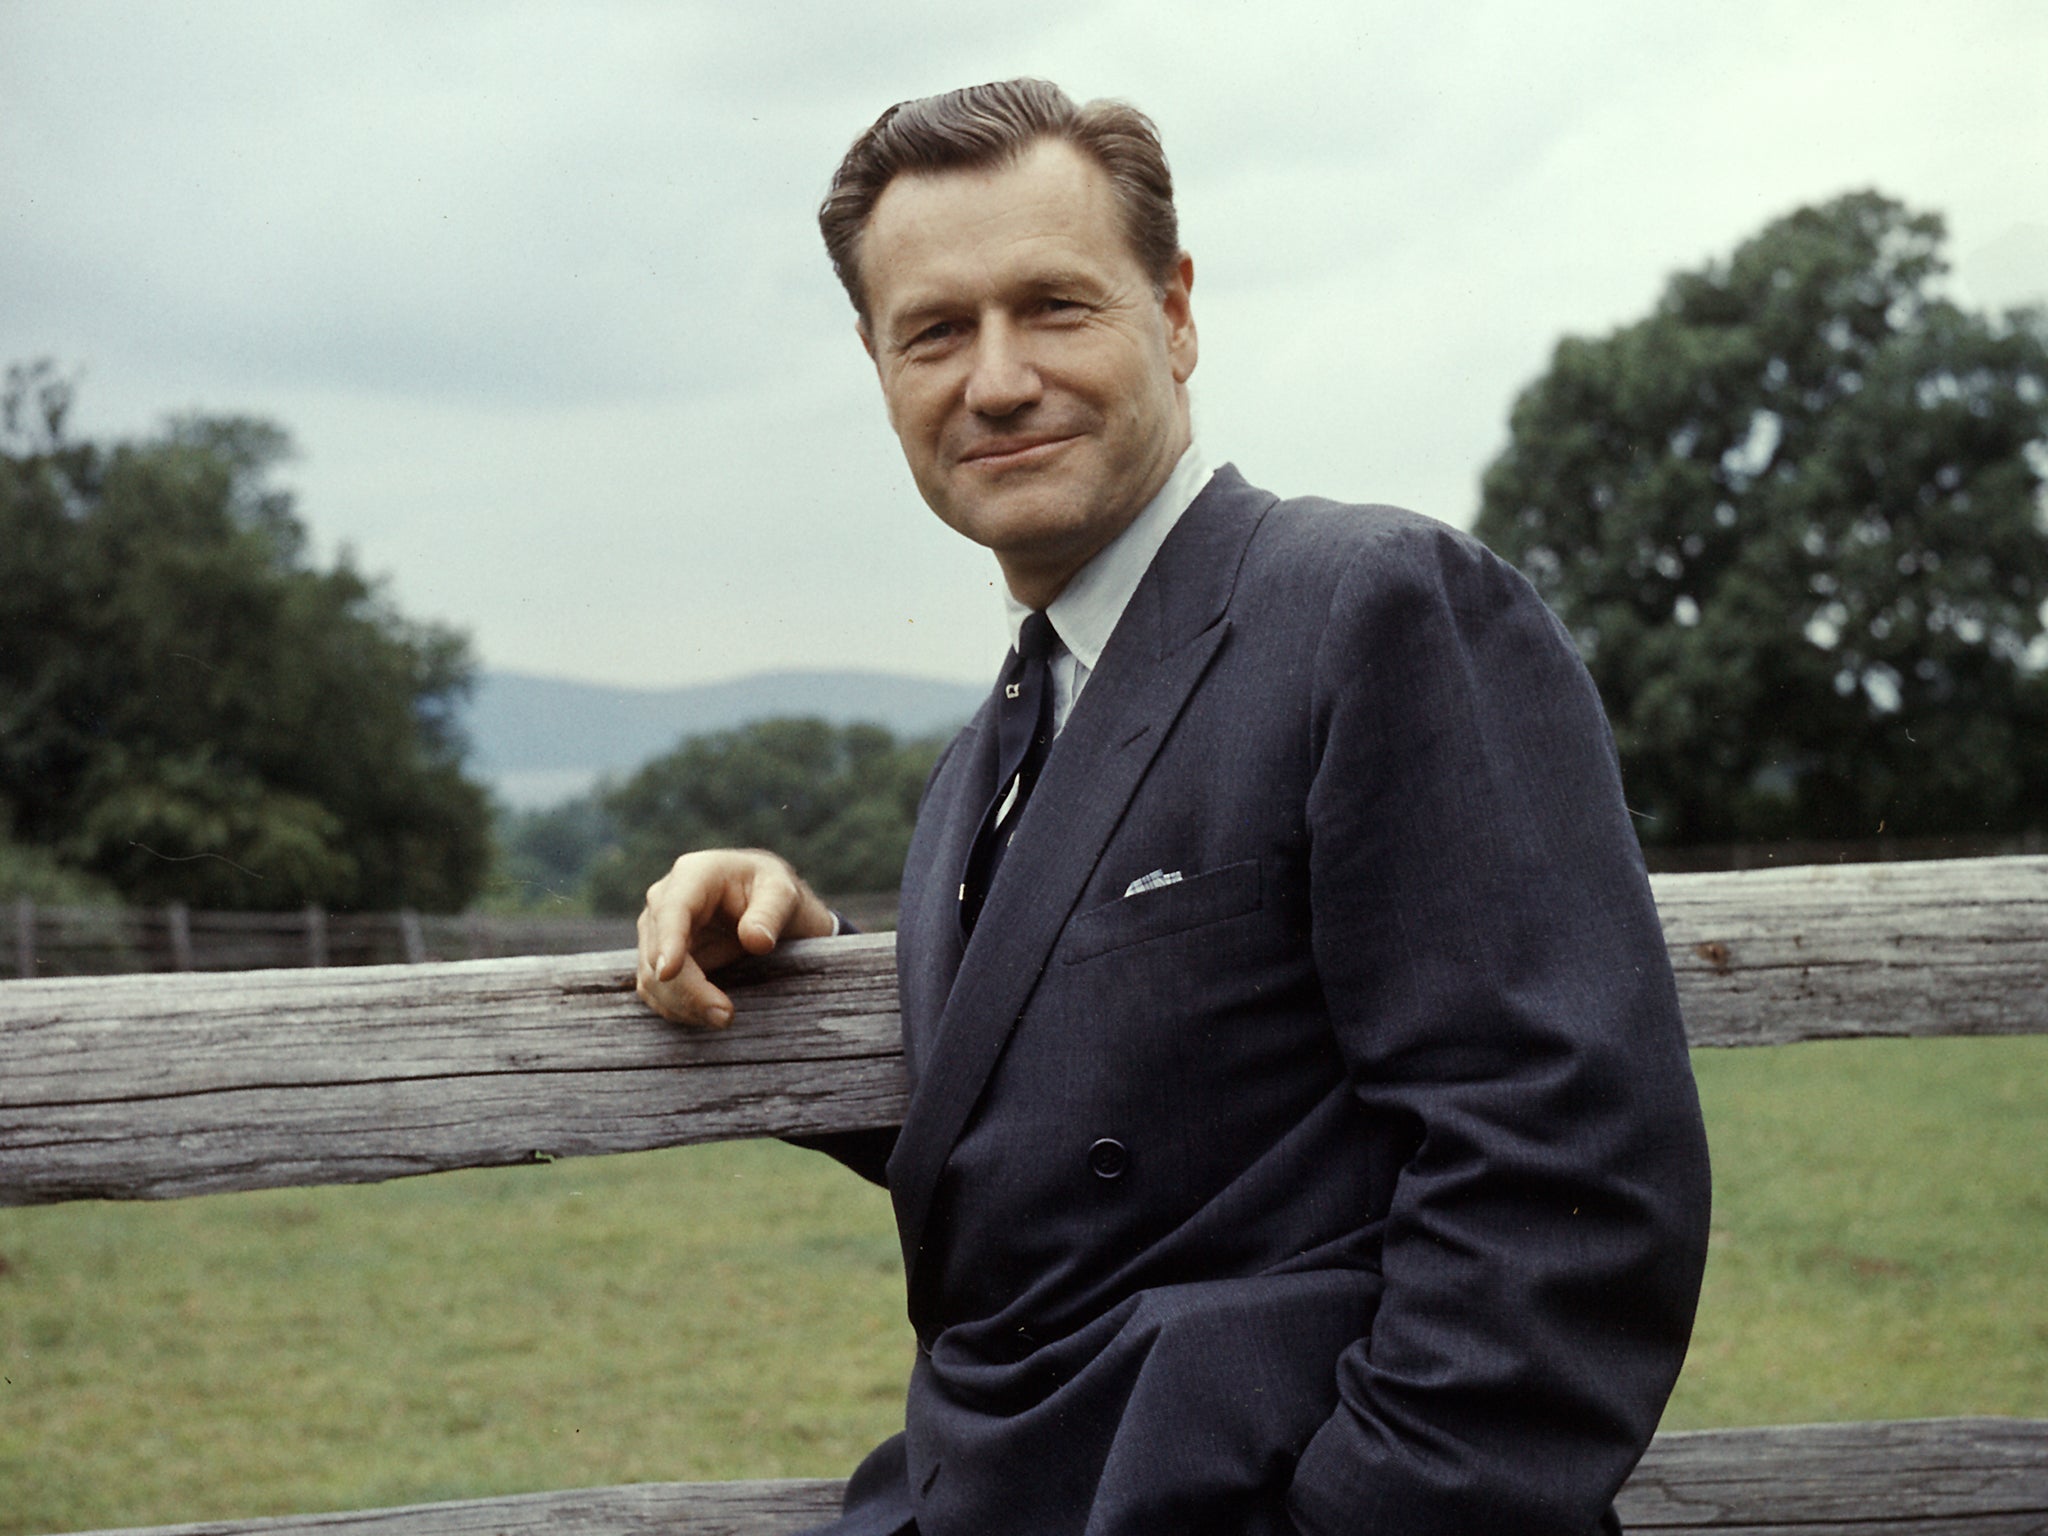 Nelson Rockefeller was governor of New York and Gerald Ford’s vice-president